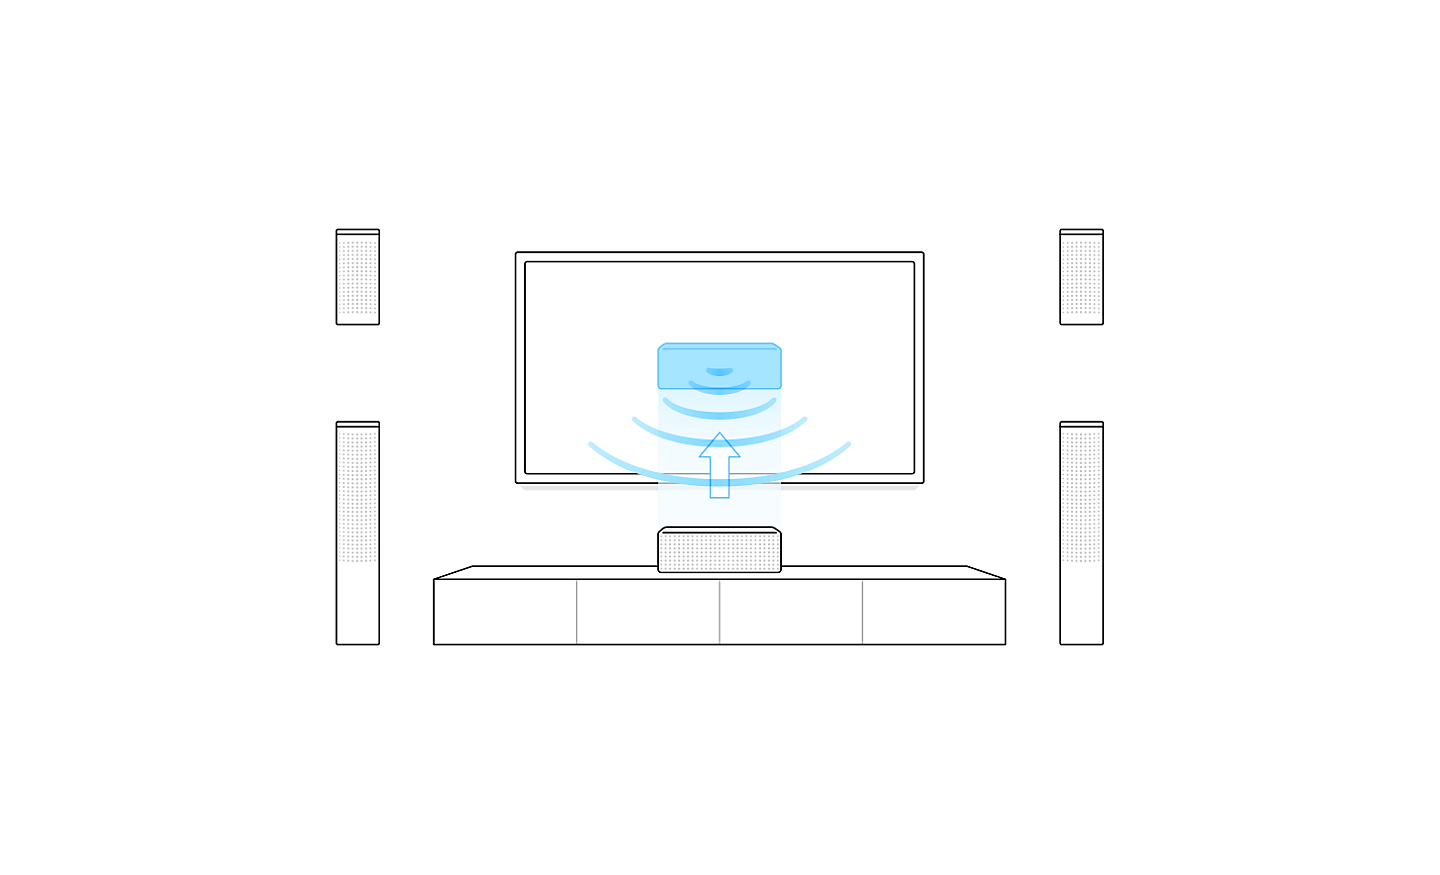 Outline image of a TV with speakers, a blue version of the center speaker sits in front of the TV showing sound direction